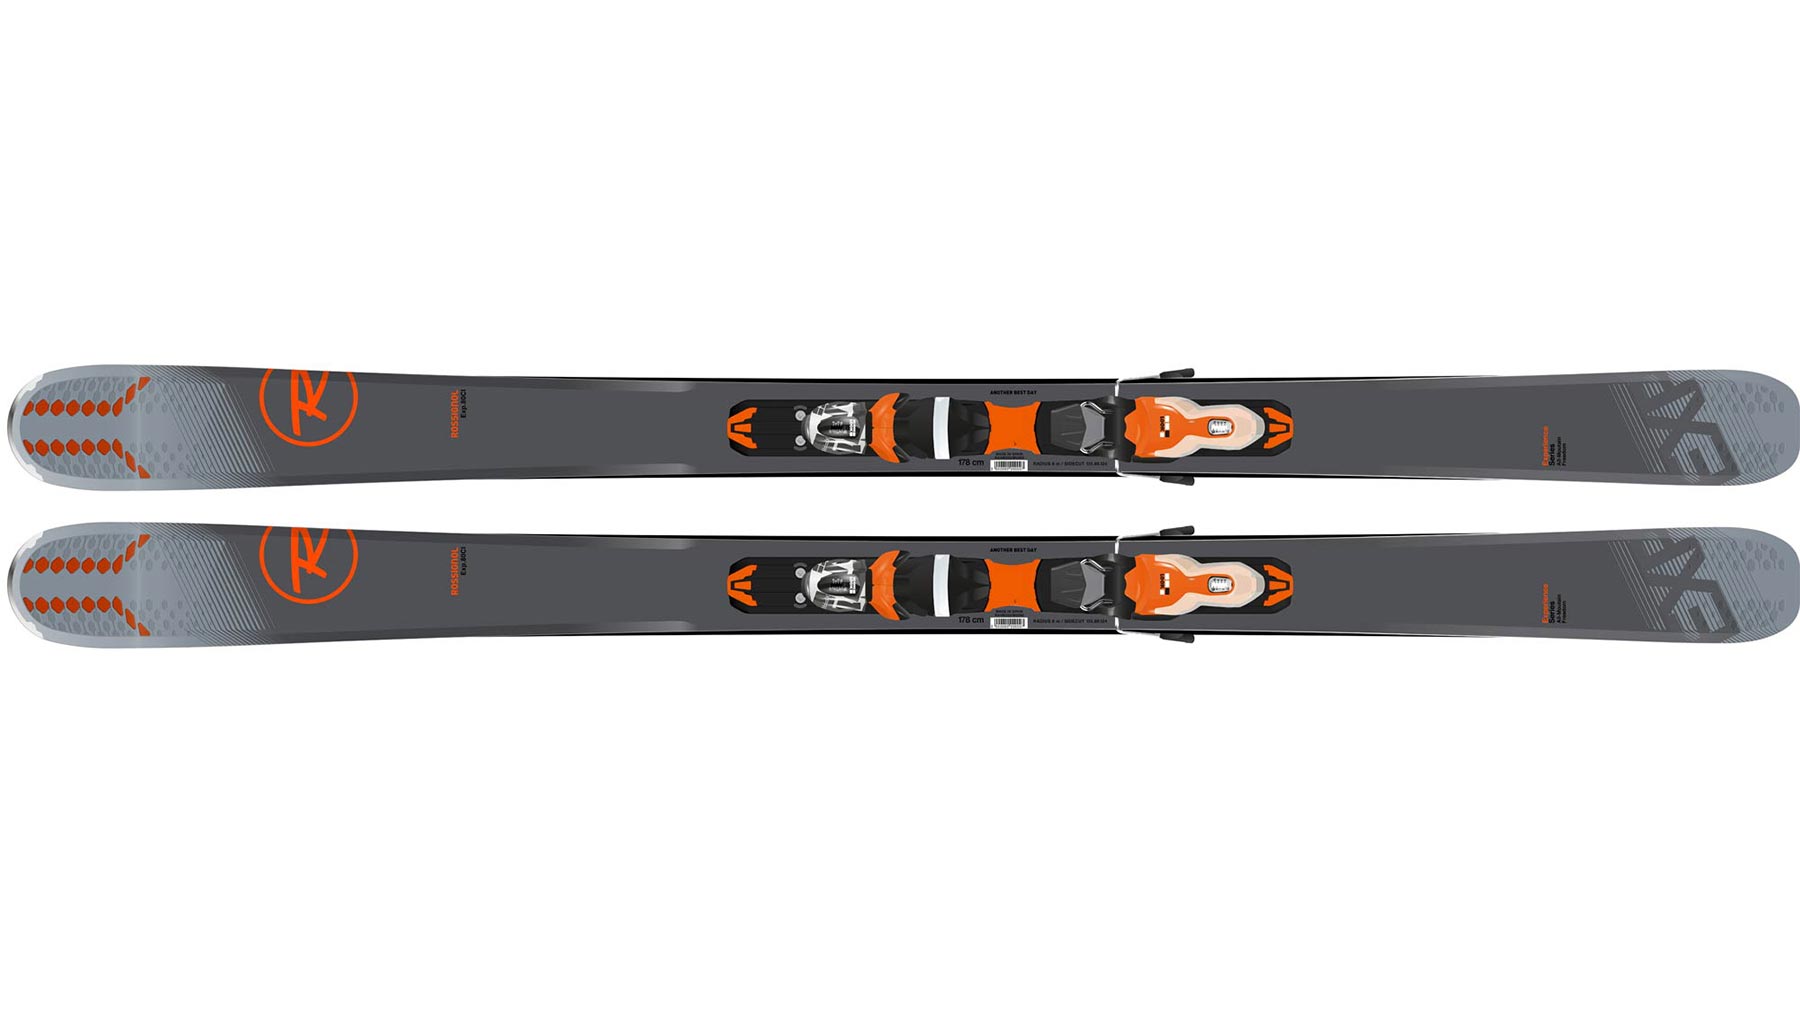 Rossignol Experience 80 Skis